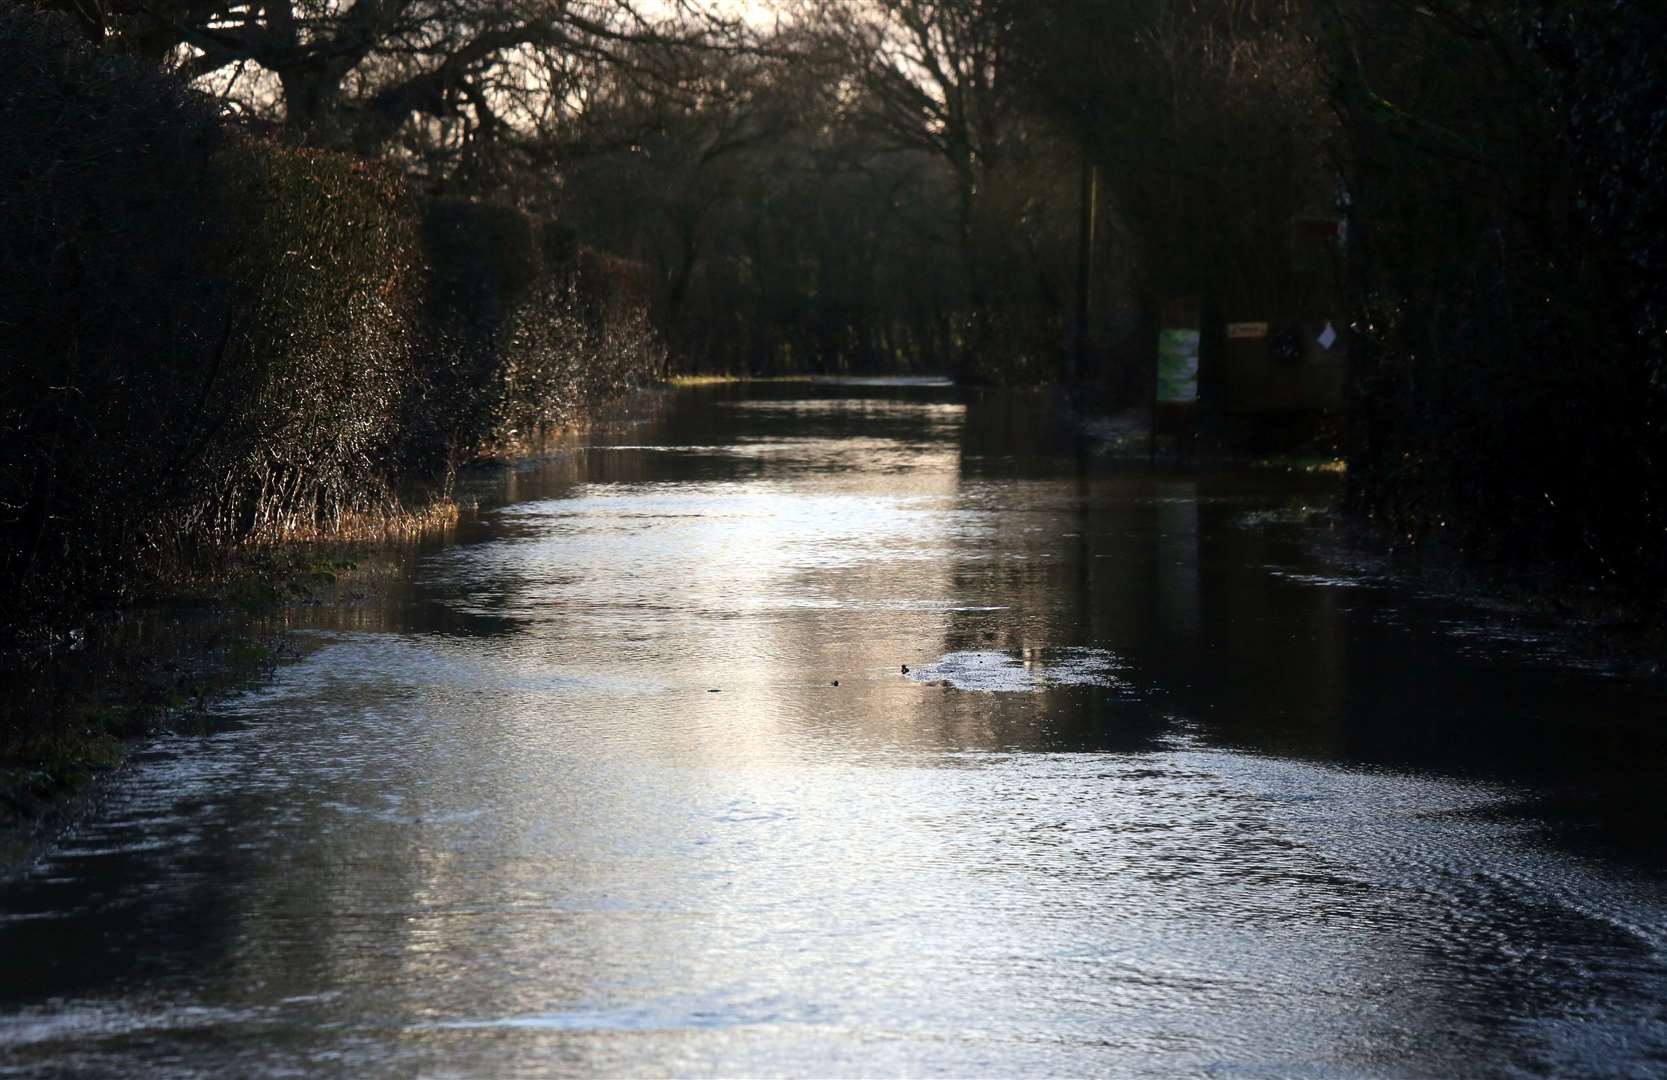 New Barn Road in Hawkenbury has shut because of flooding near Staplehurst. Picture: UK News in Pictures (26827687)